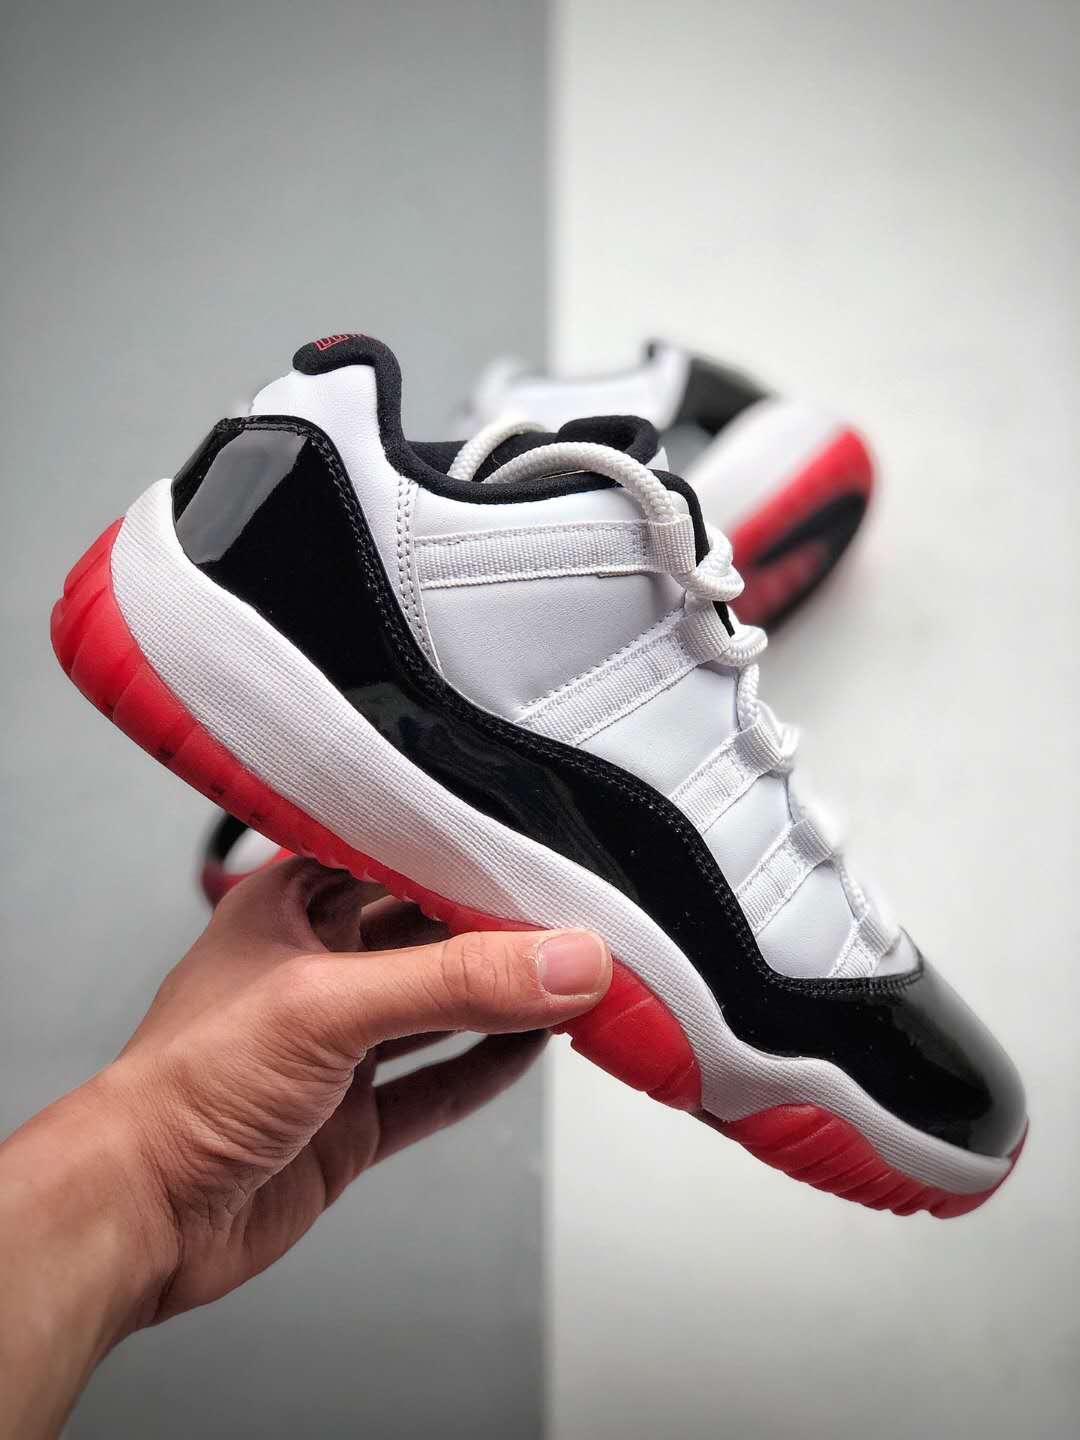 Air Jordan 11 Retro Low 'Concord-Bred' AV2187-160 - Iconic Style and Classic Colorway for the Ultimate Sneaker Enthusiast!